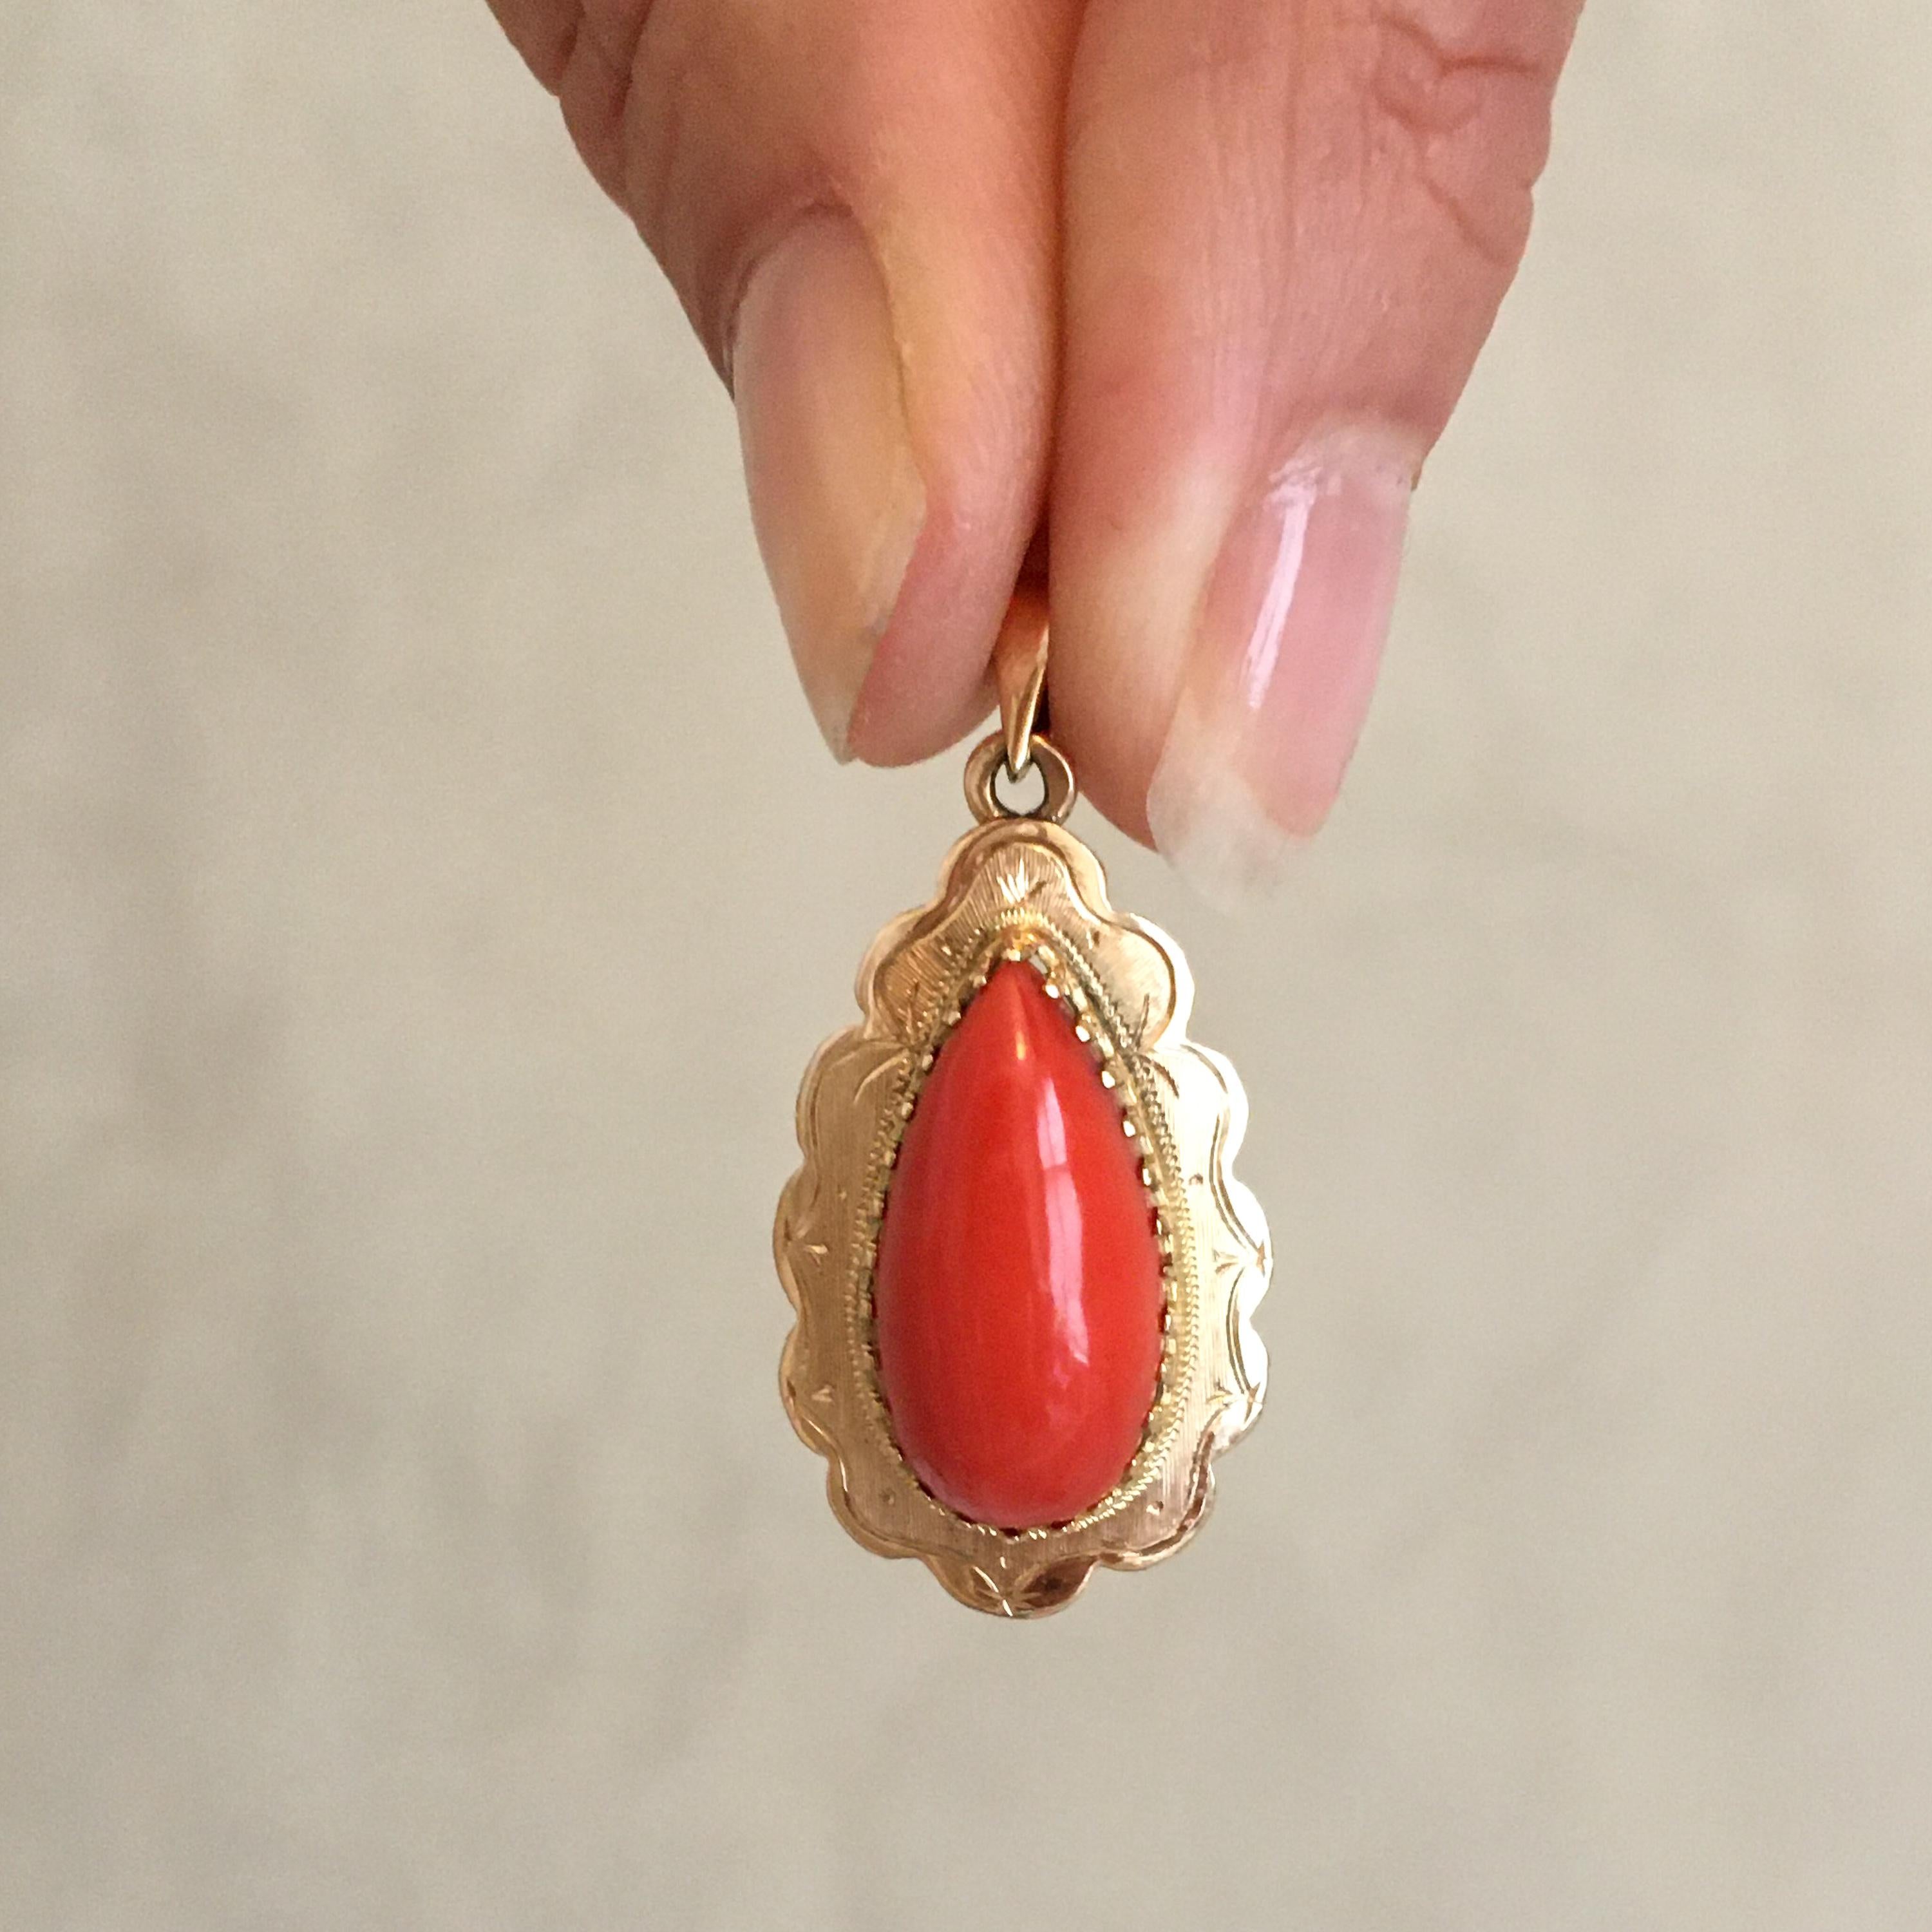 A 14 karat yellow gold pendant set with a large natural coral drop-shaped cabochon. The border of the pendant has a beautiful scalloped design and etched fantasy motifs at its surface. The coral cabochon is bezel set.  

The *coral pendant is in